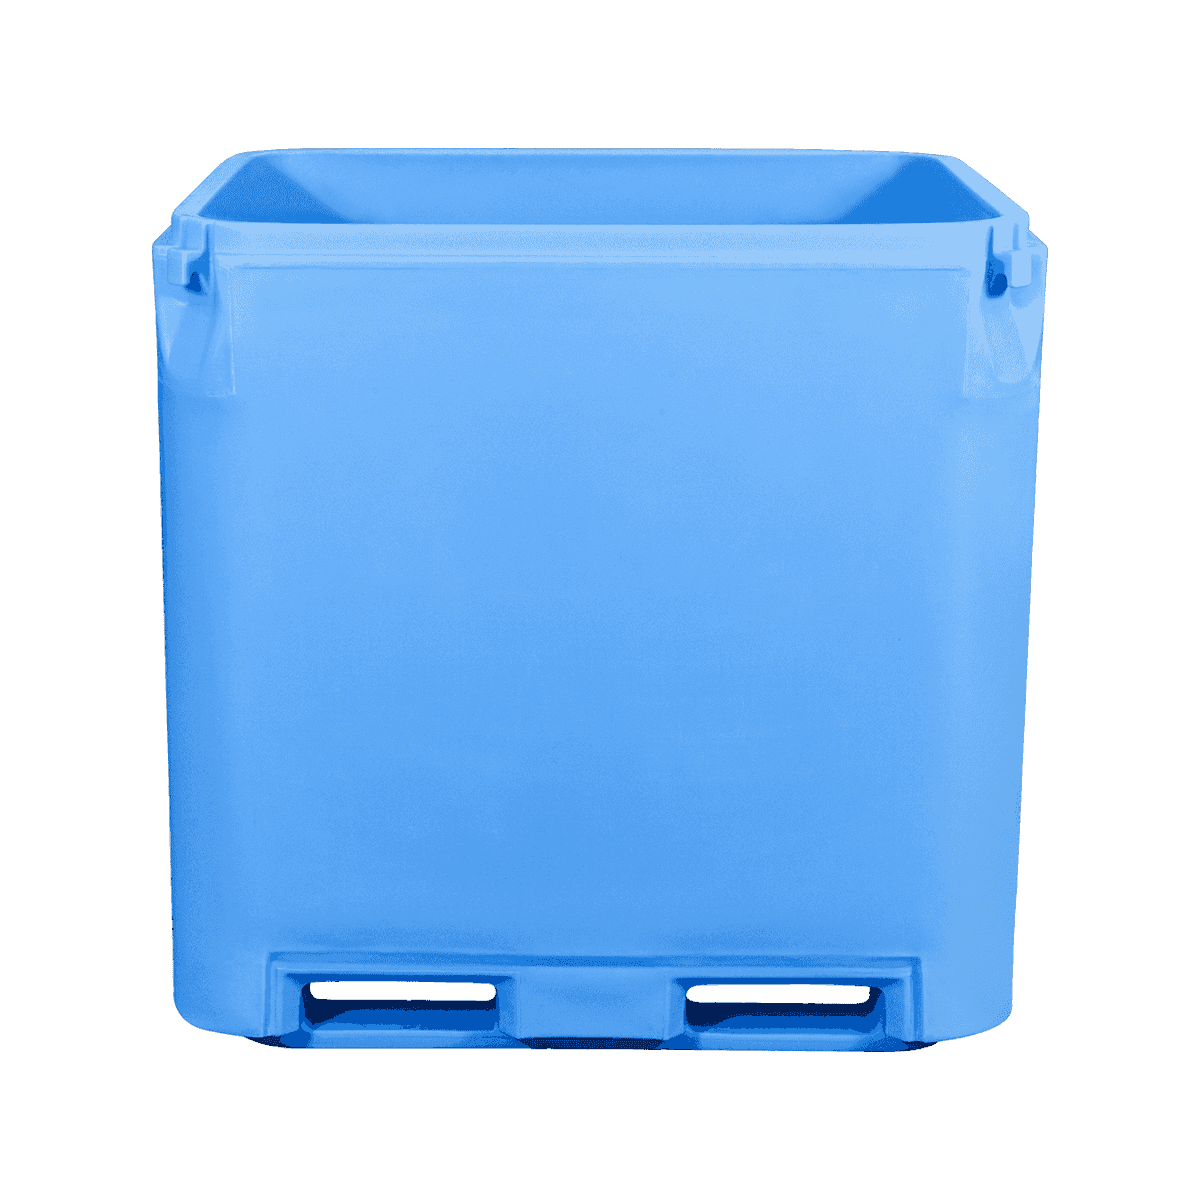 How To Choose The Ideal Thermal Insulated Storage Containers?